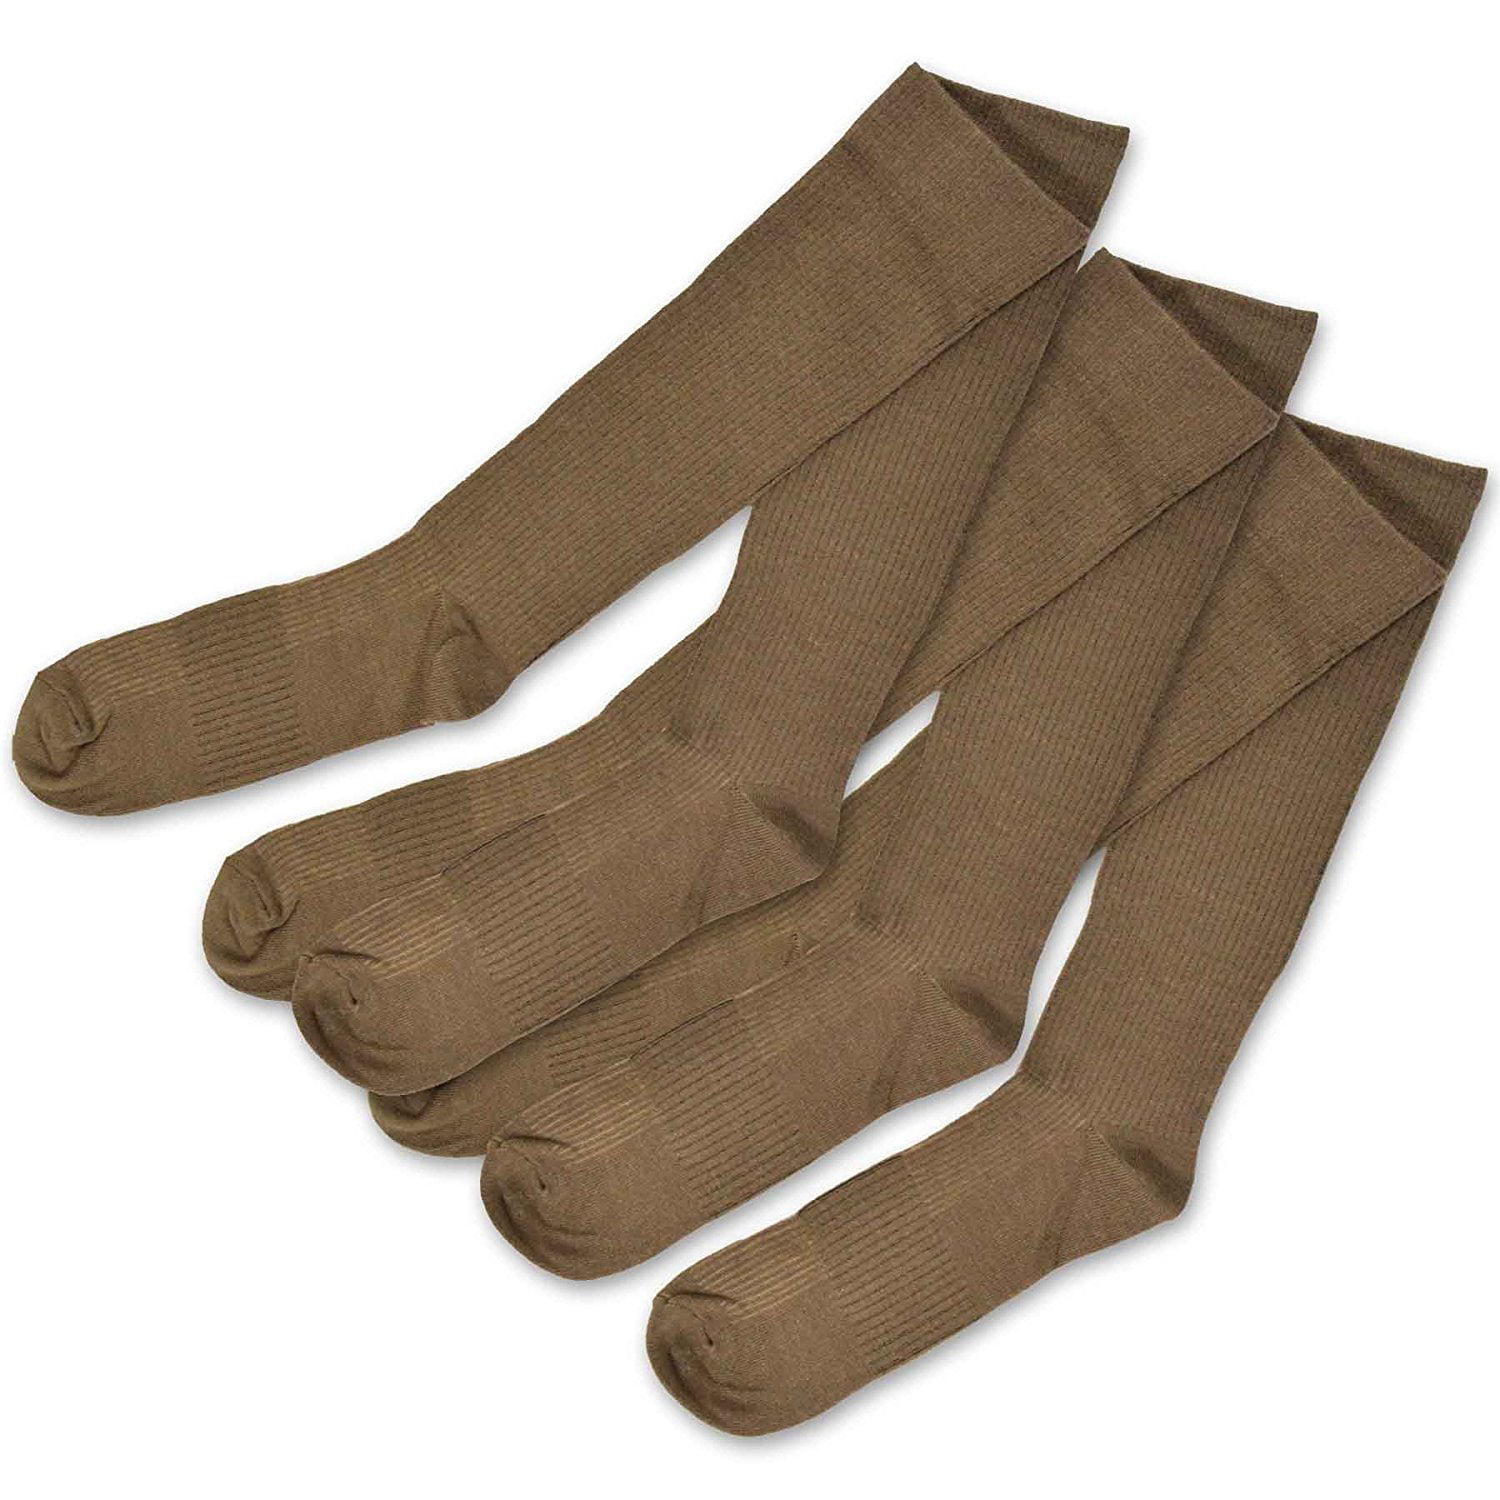 Large TeeHee Viscose from Bamboo Compression Knee High Socks with Rib 3-Pack , Khaki 10-13